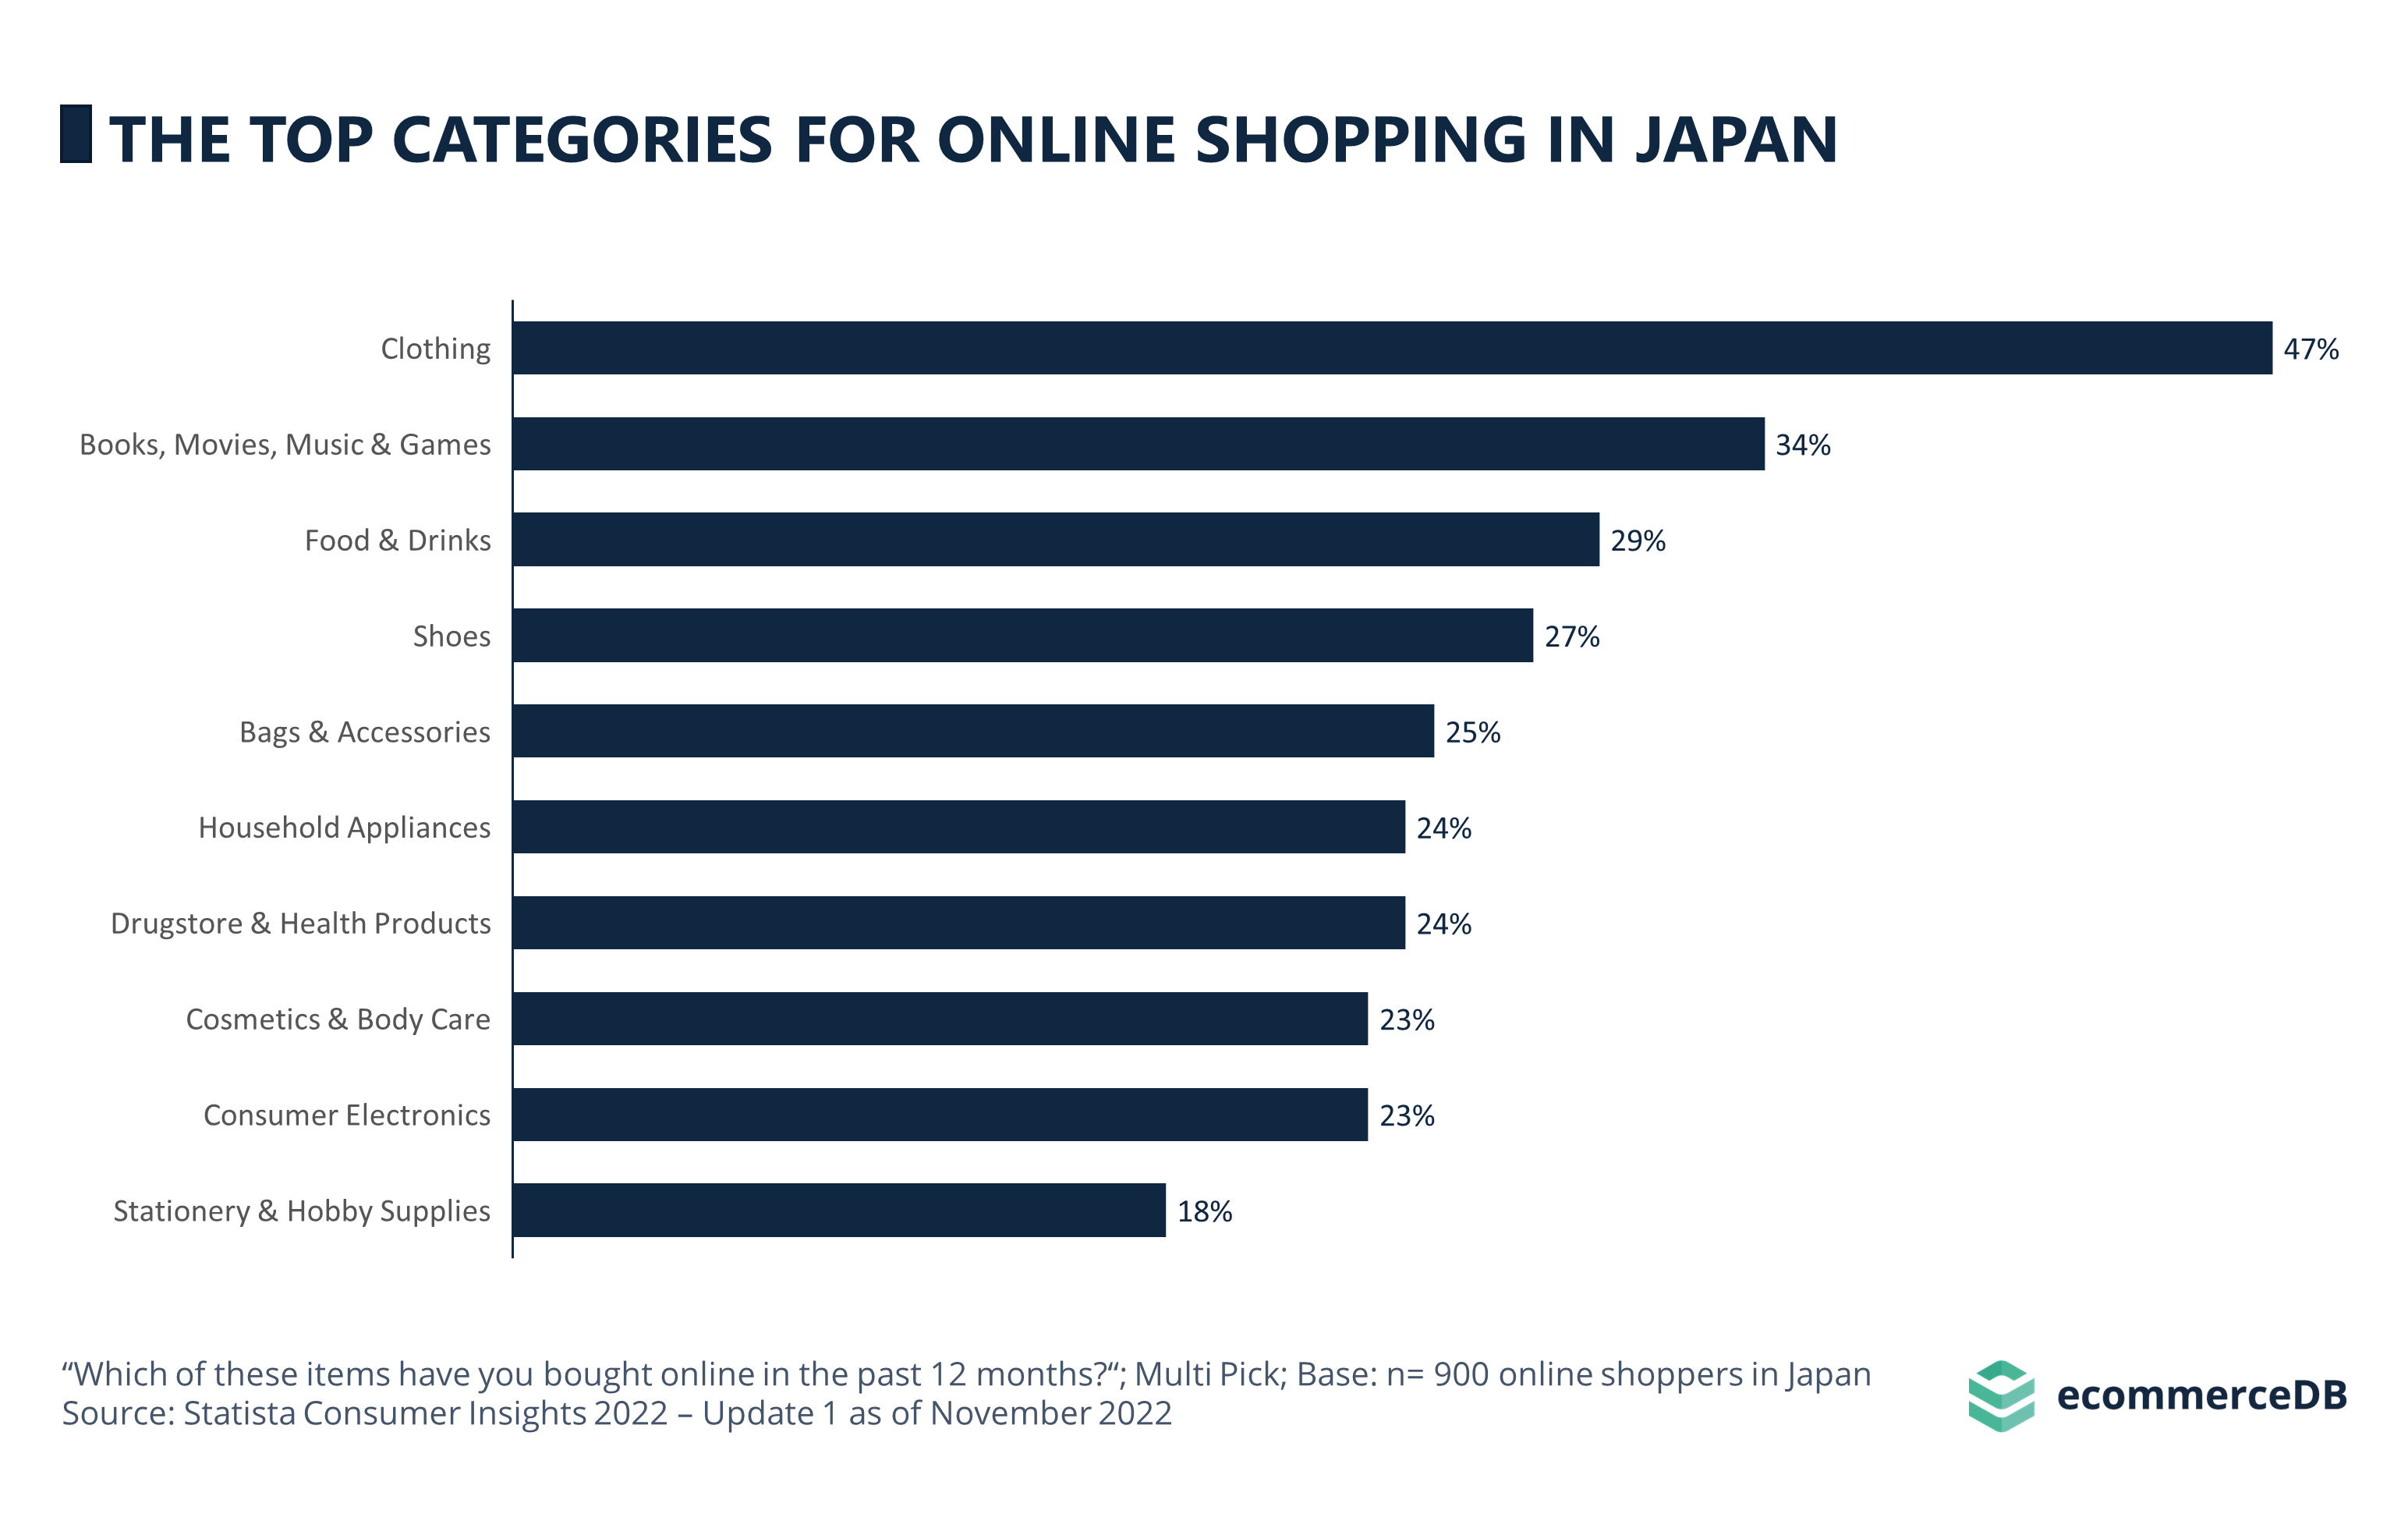 What Are The Top Online Games In Japan?